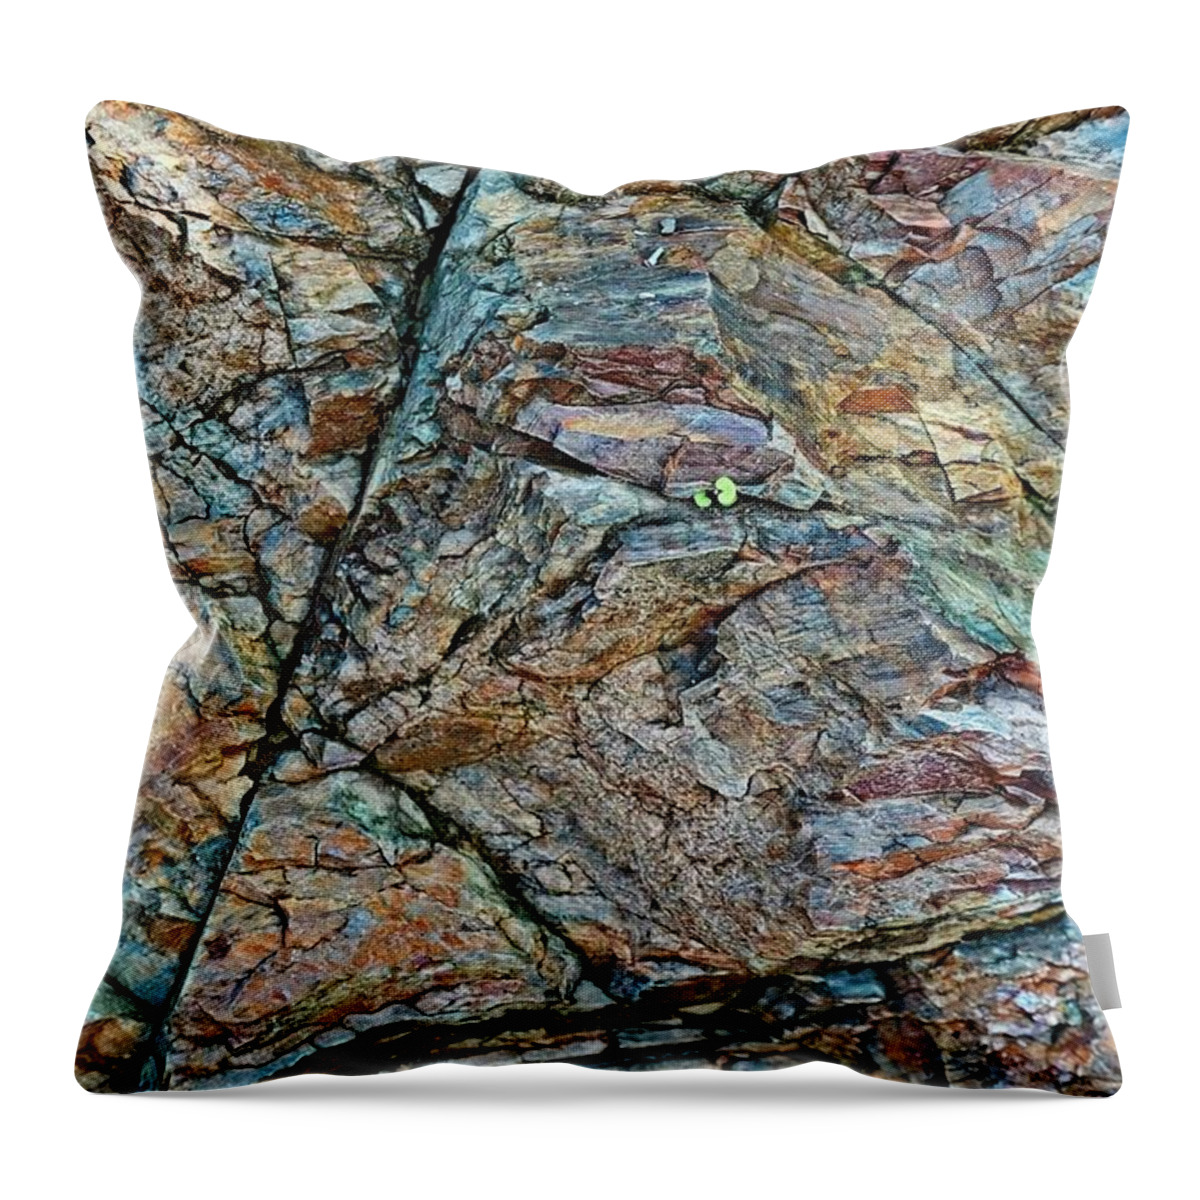 Rocks Throw Pillow featuring the photograph Rocks 6 by Alan Norsworthy